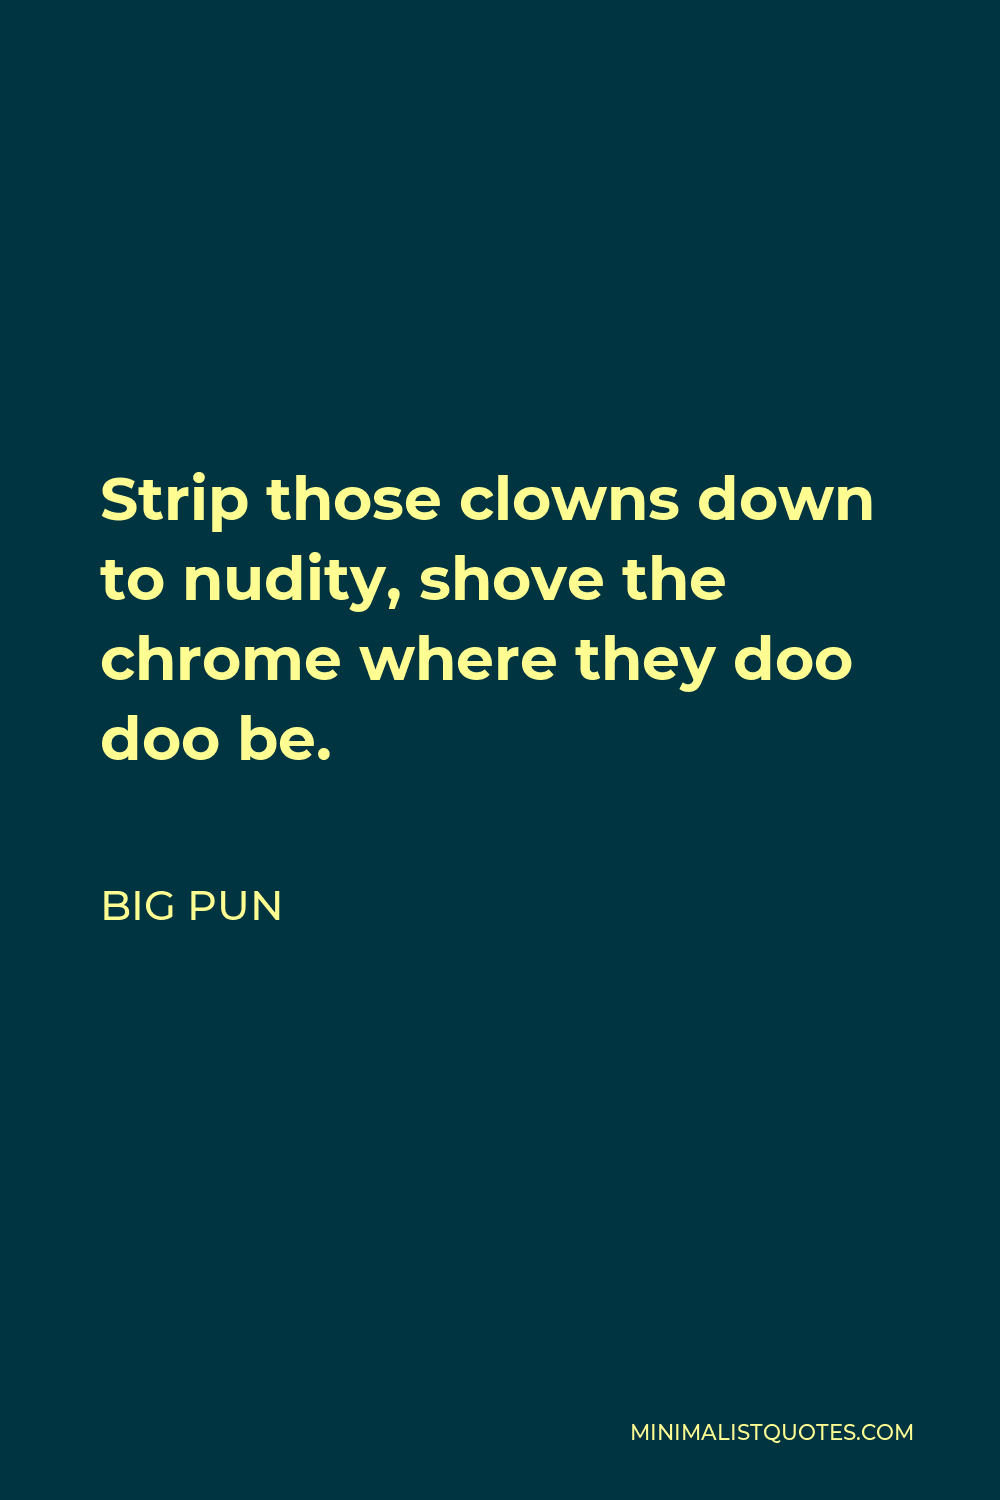 Big Pun Quote - Strip those clowns down to nudity, shove the chrome where they doo doo be.